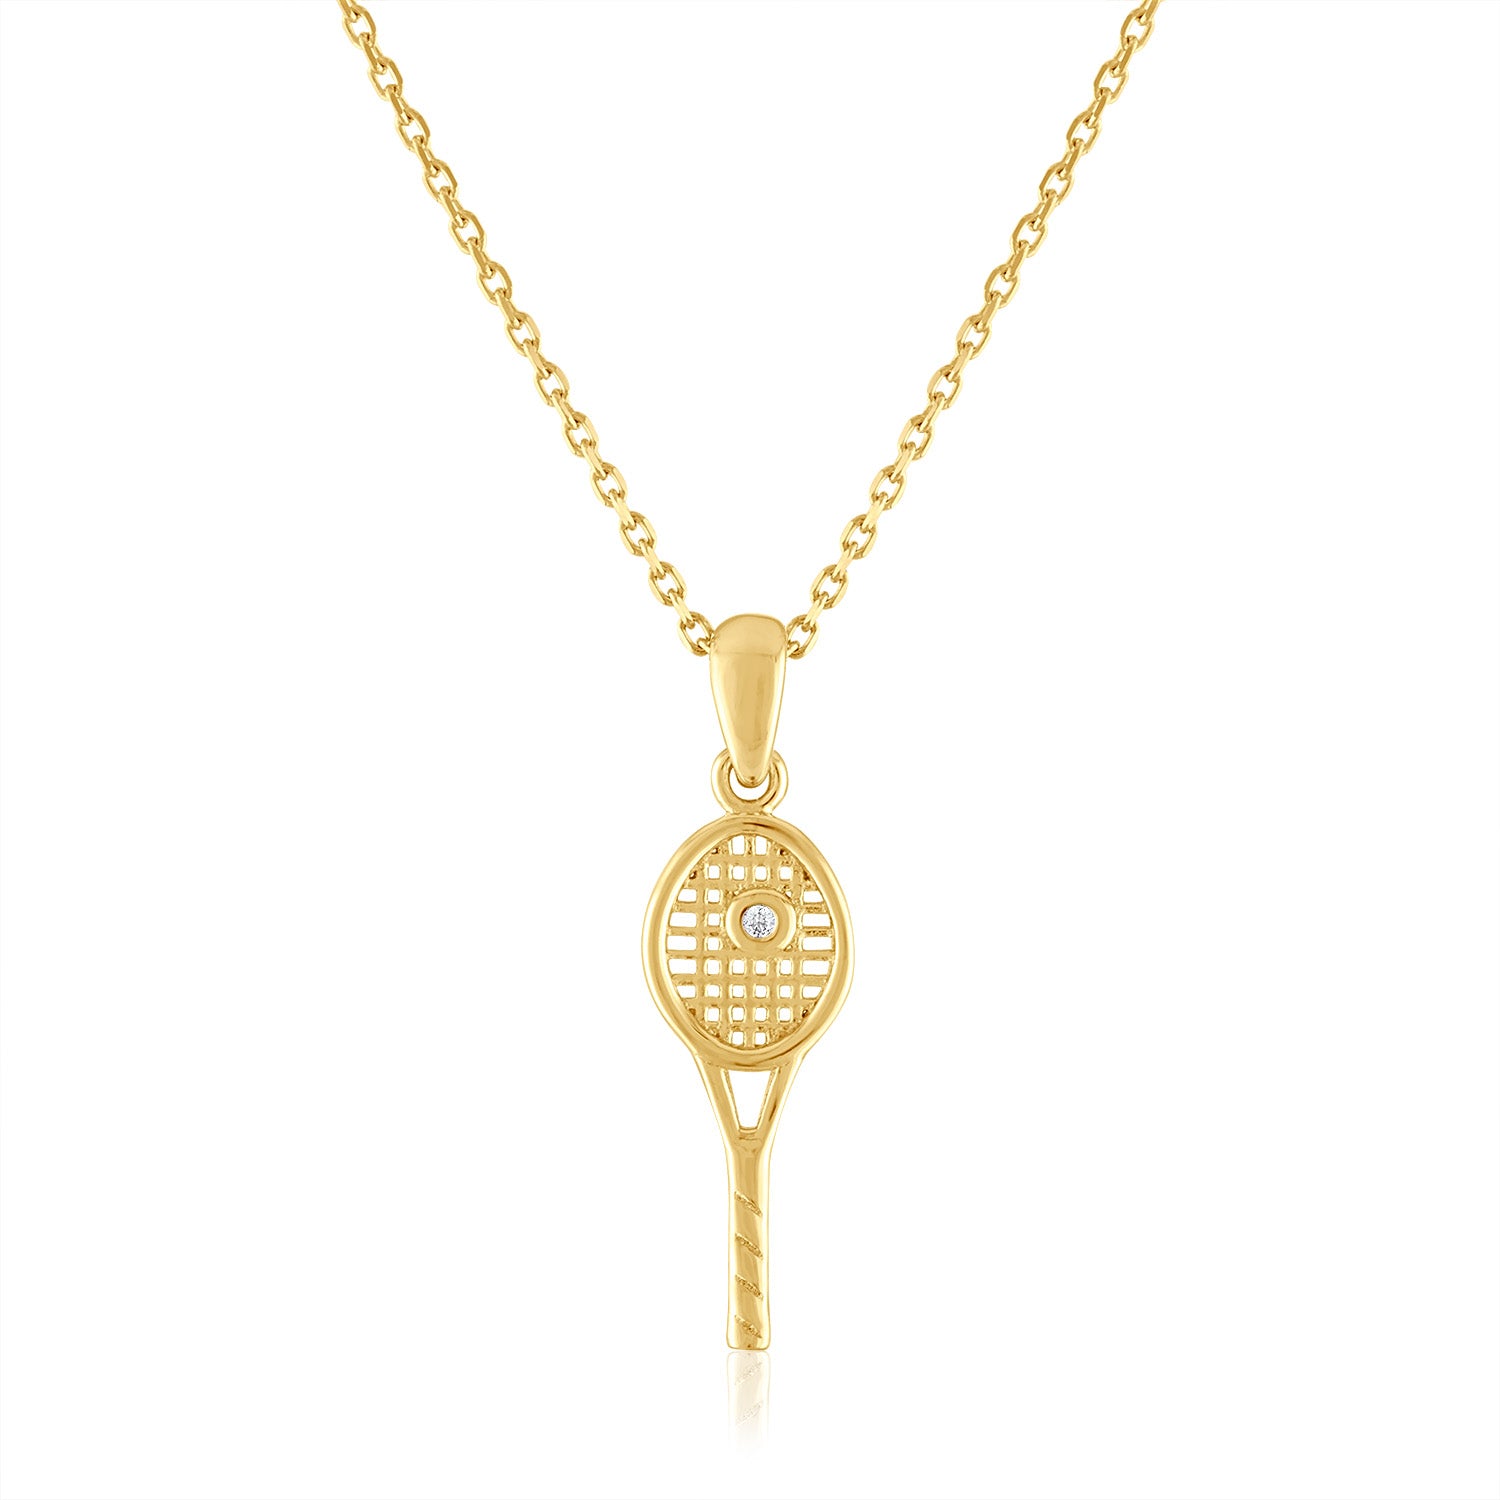 14Kt Gold and diamond Petite Tennis Racquet Pendant-One of a kind